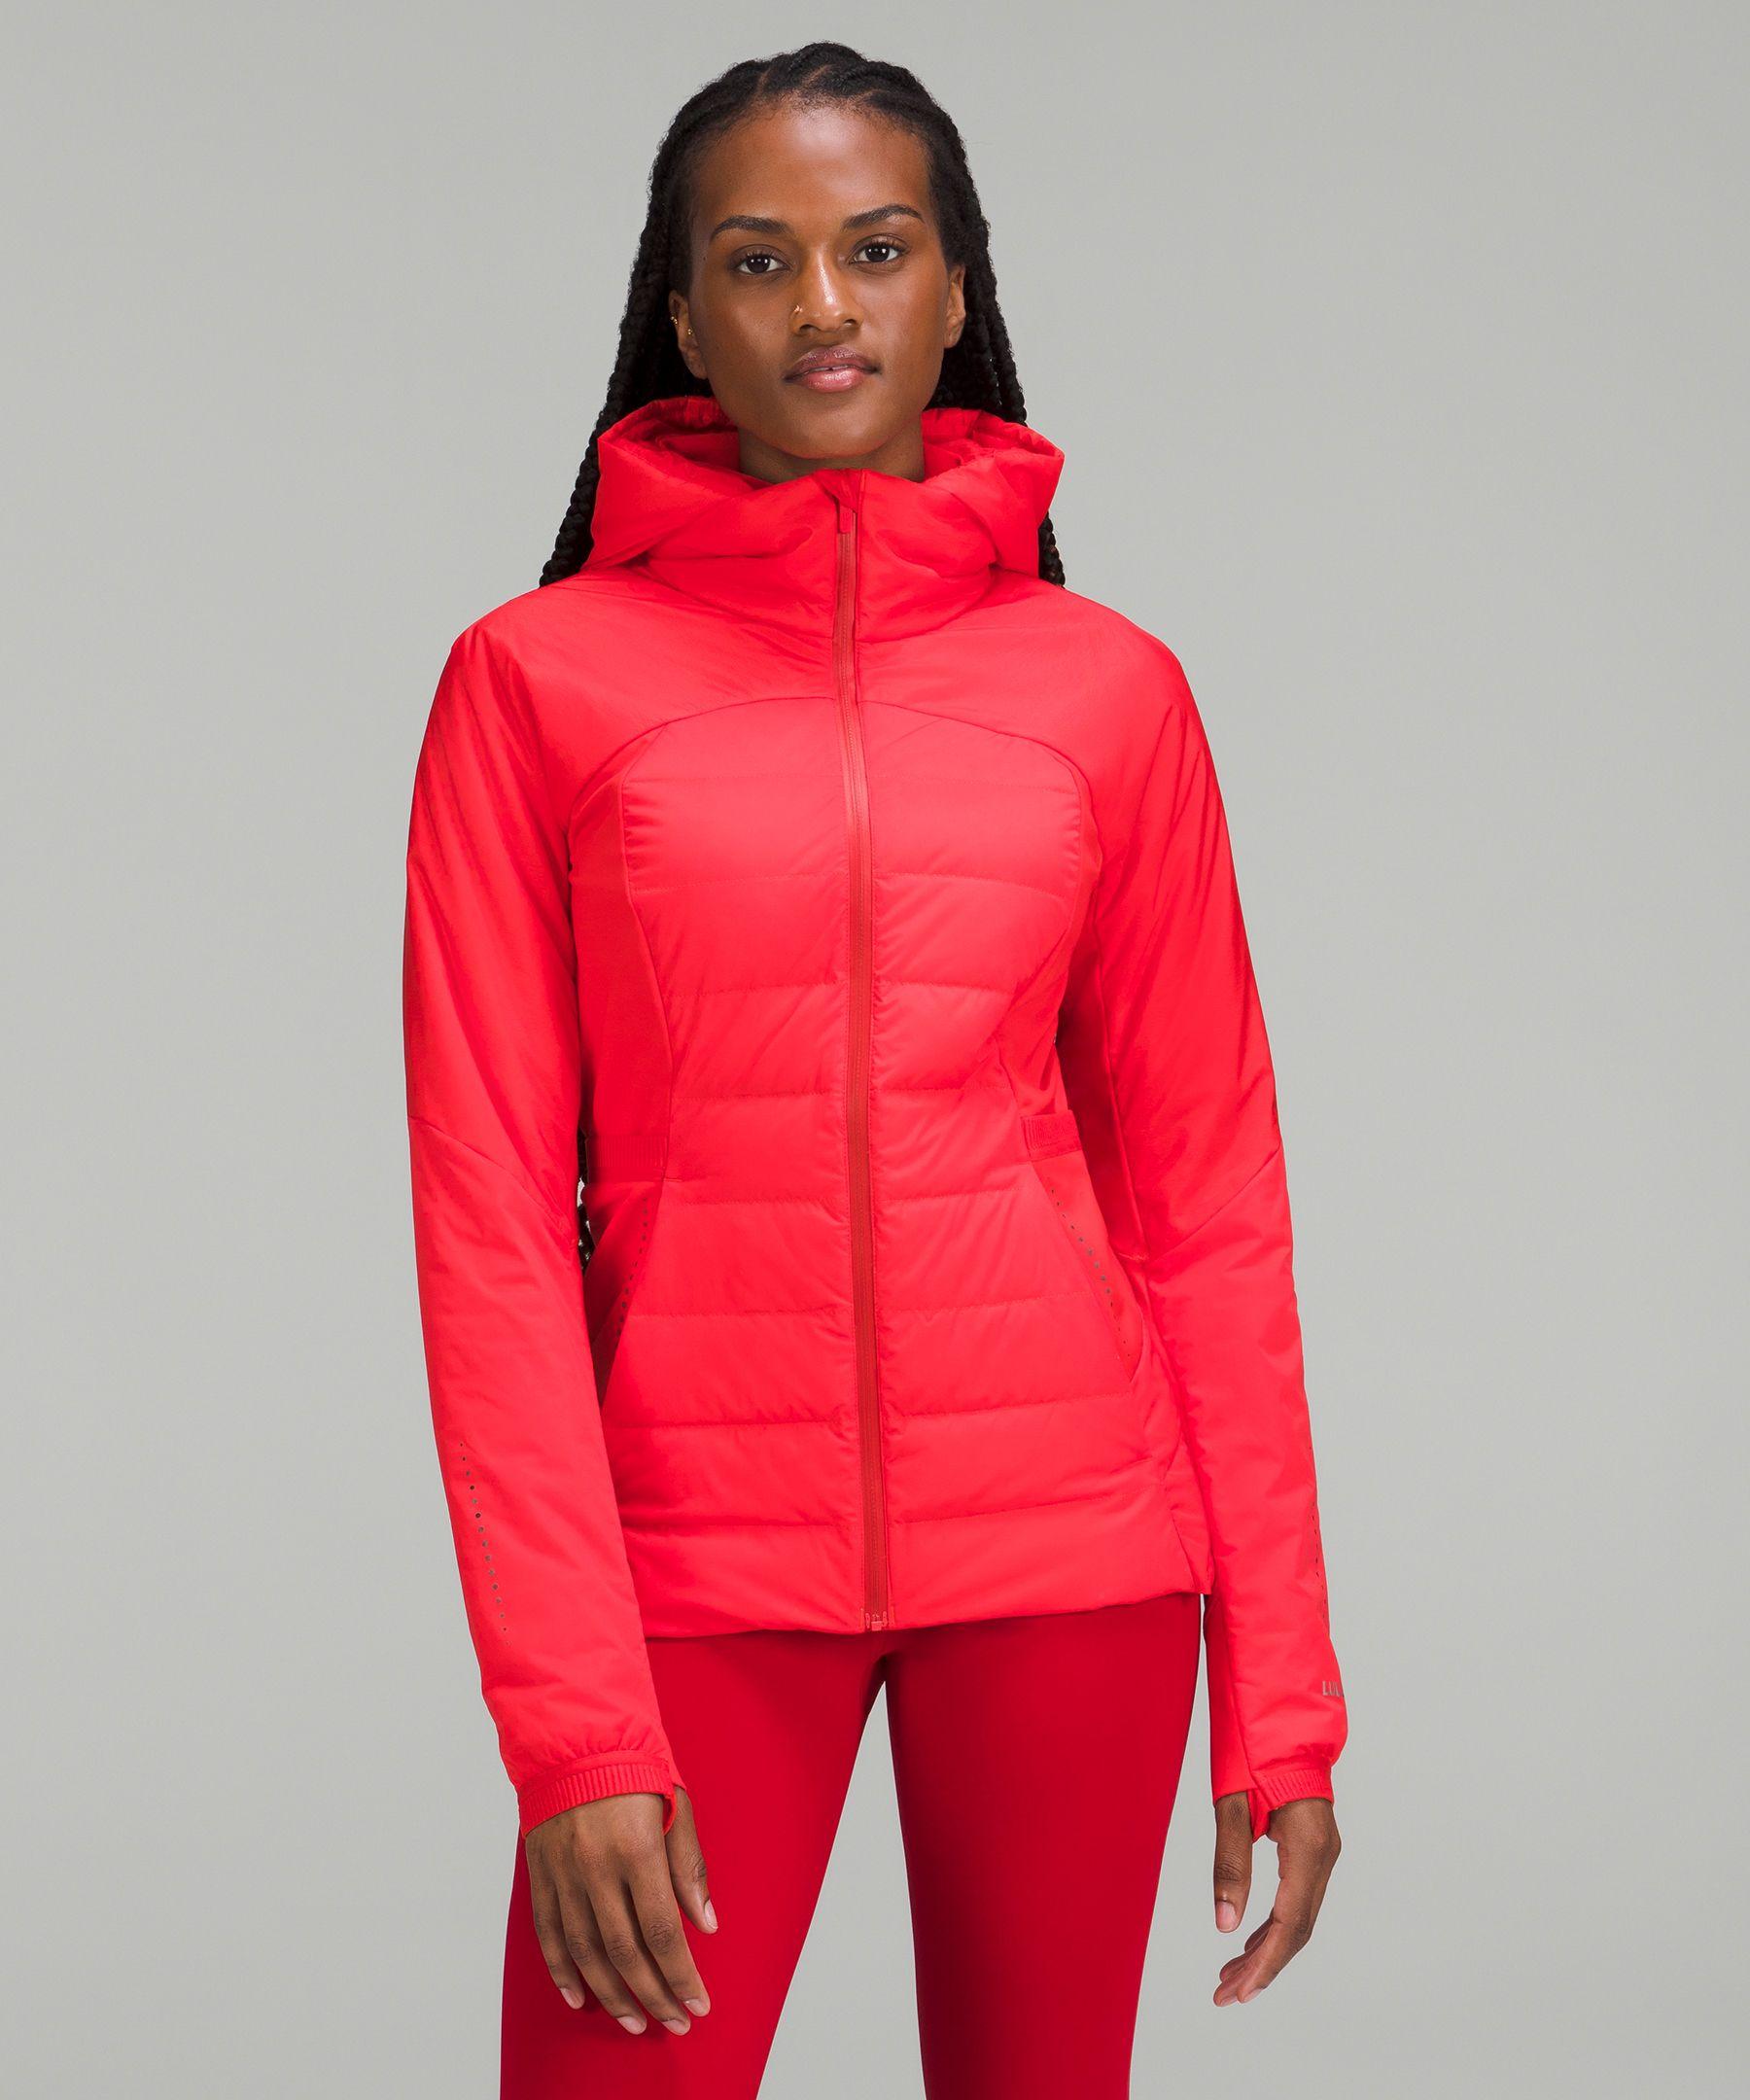 lululemon athletica Down For It All Jacket - Color Red/neon - Size